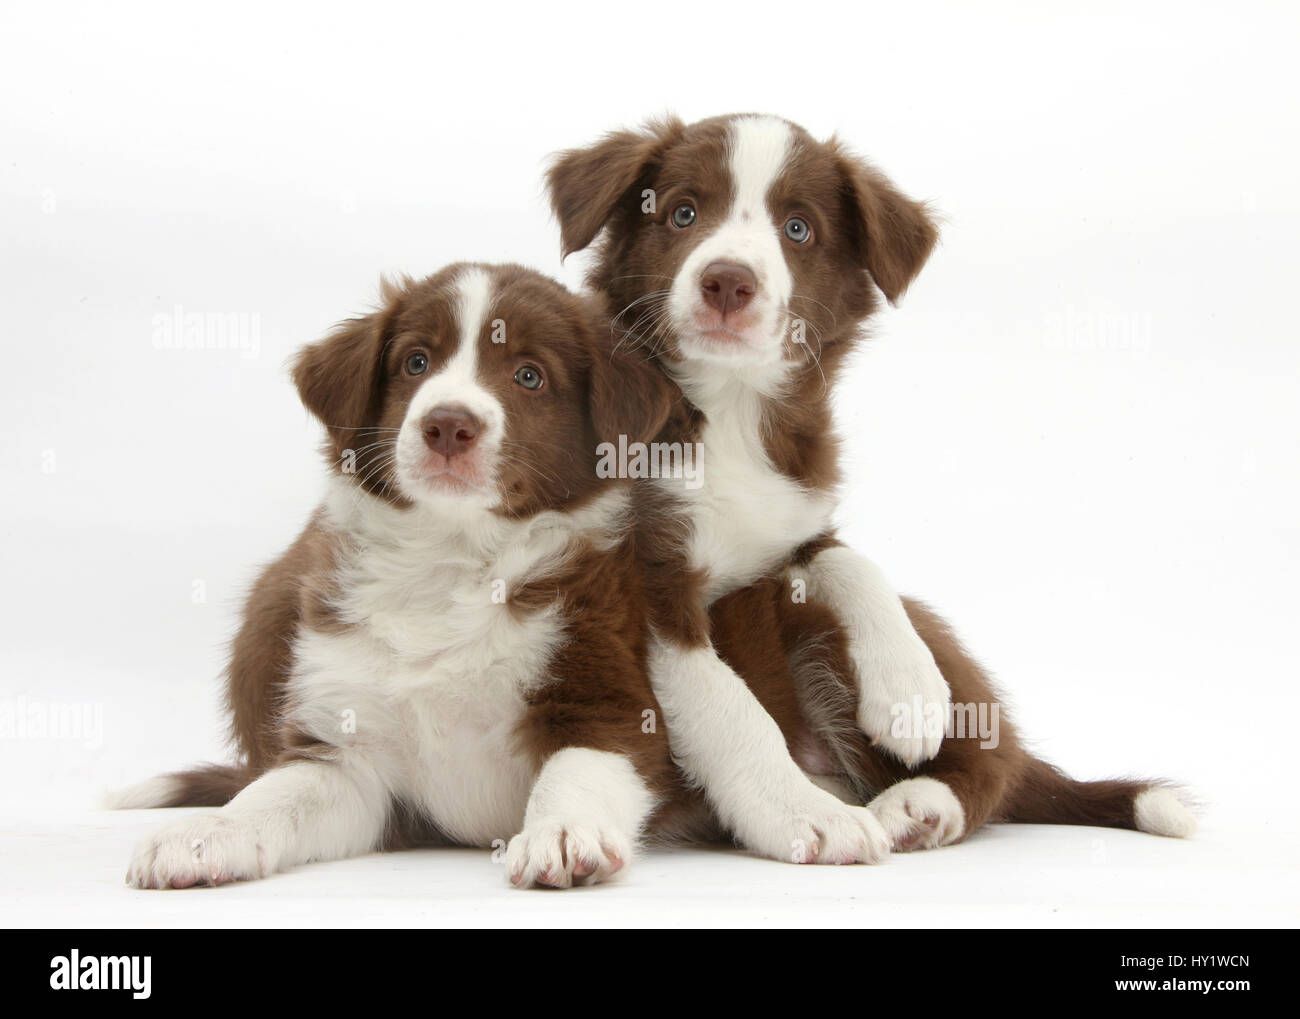 Chocolate Border collie puppies, age 7 weeks. Stock Photo